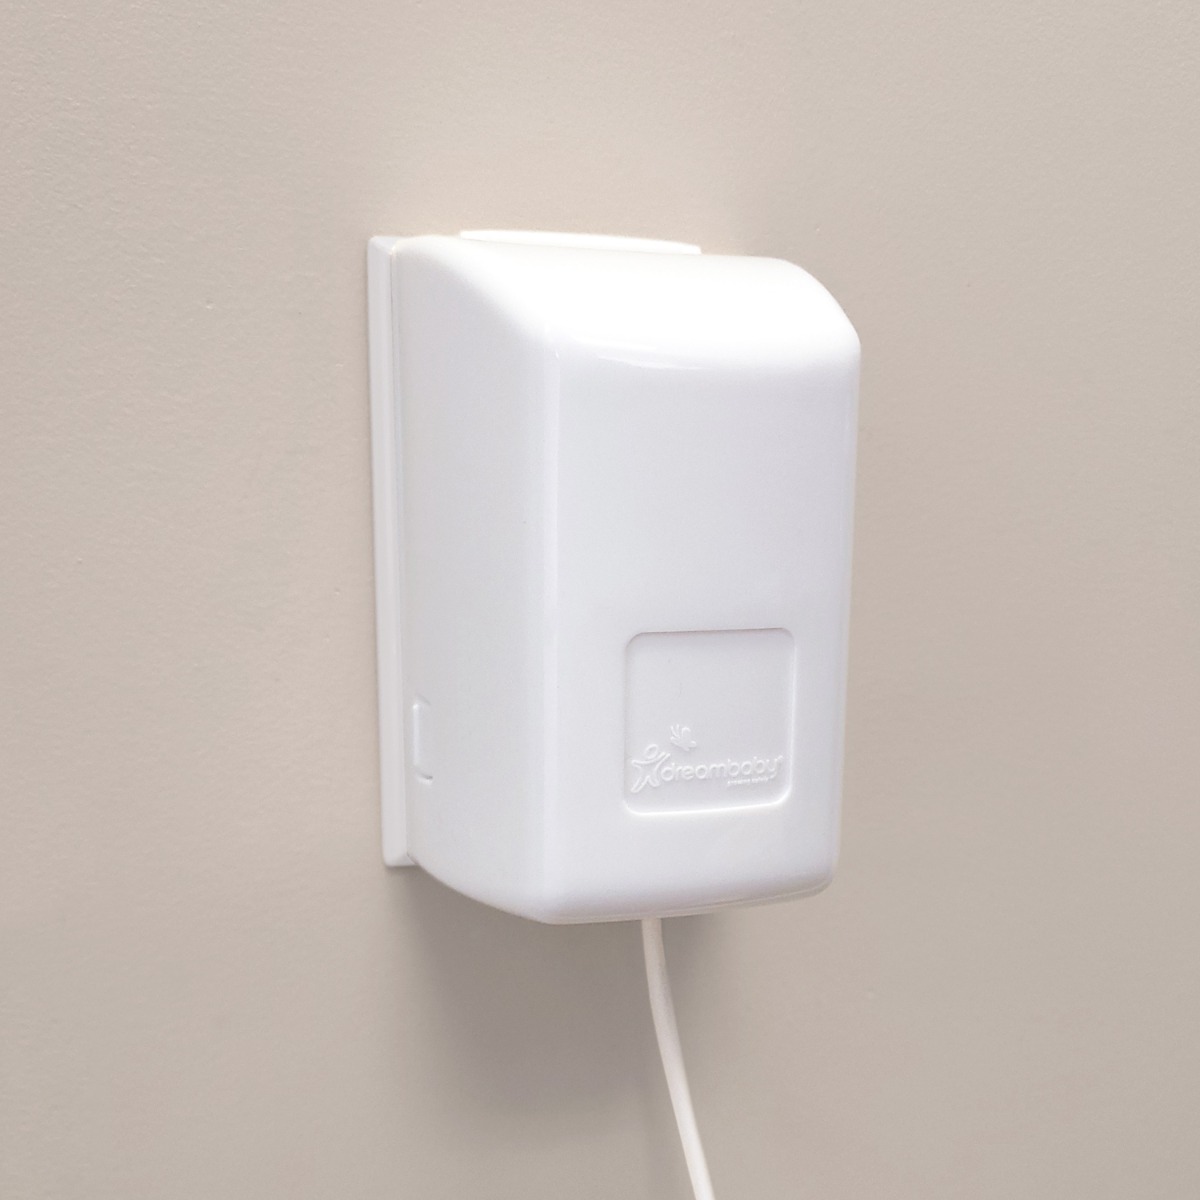 Dreambaby L945 White Outlet Plug Cover